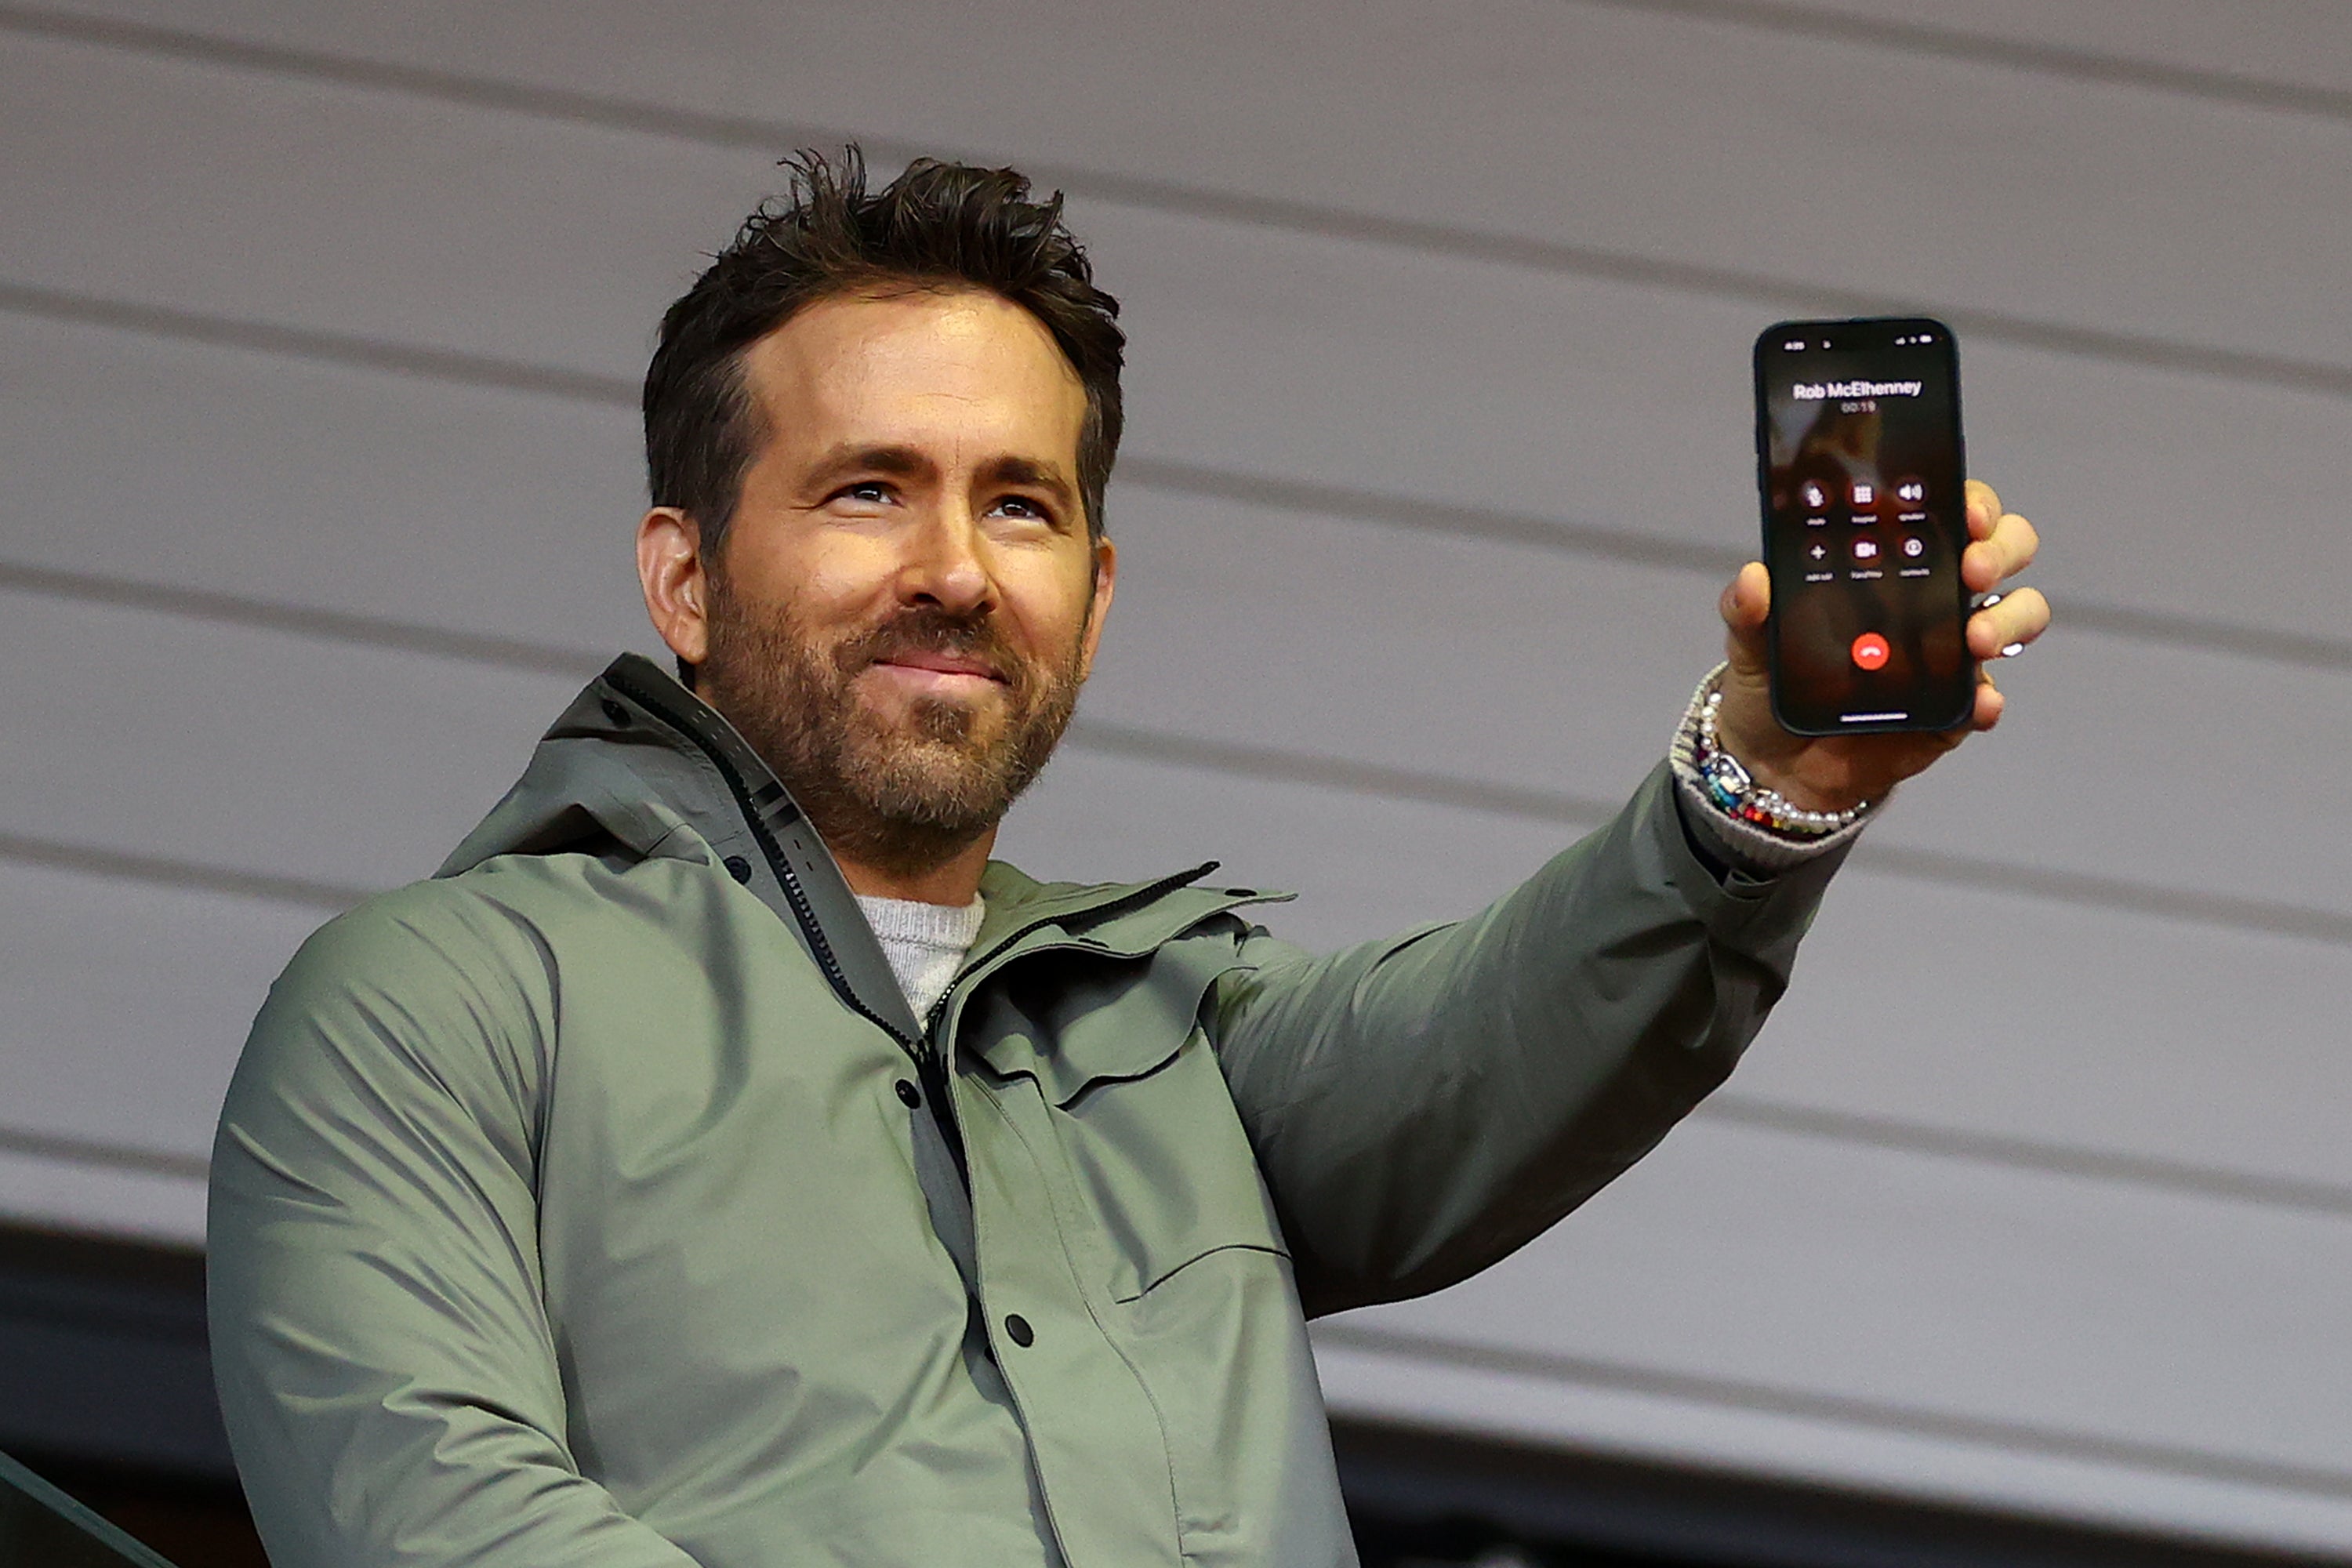 Ryan Reynolds speaks to Rob McElhenney, fellow co-owner of Wrexham, on the phone during the match